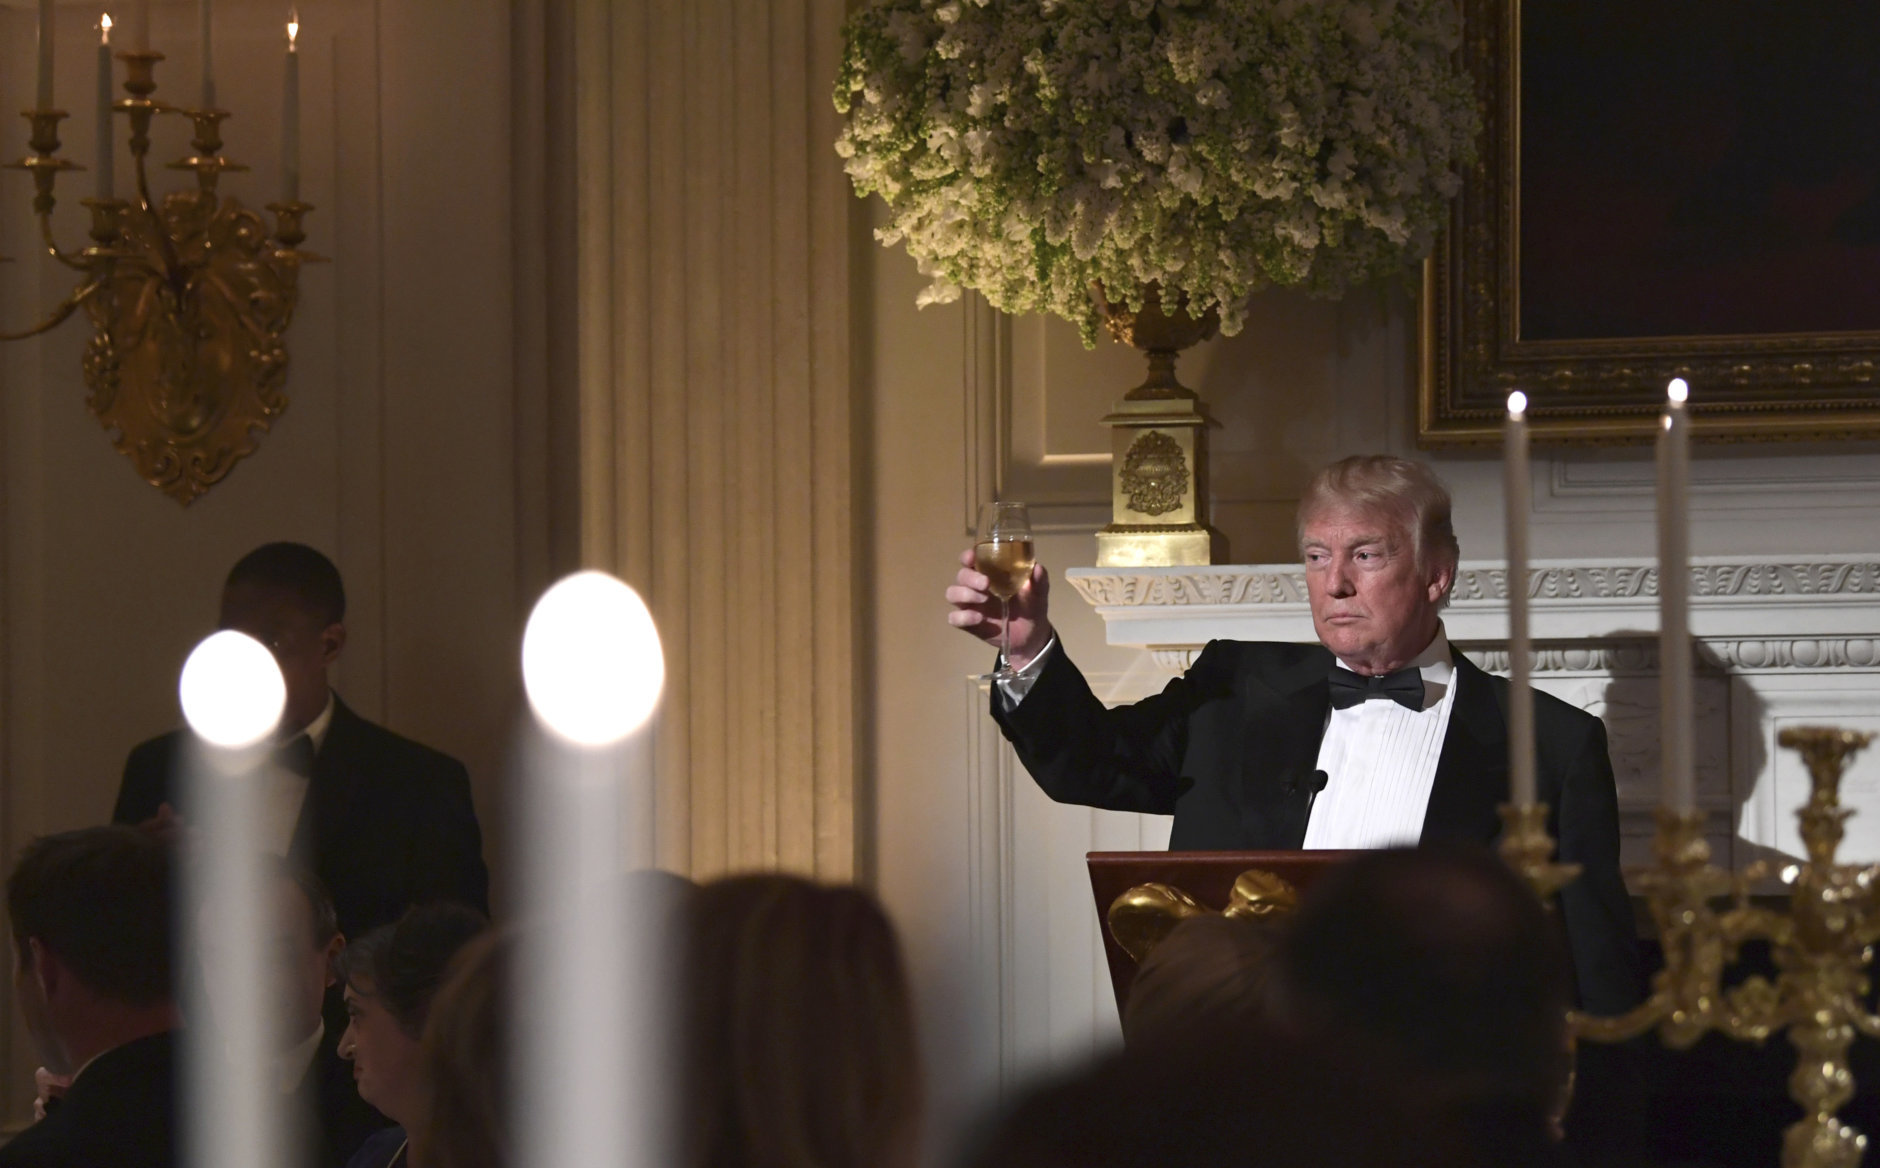 President Donald Trump offers up a toast to French President Emmanuel Macron during the State Dinner at the White House in Washington, Tuesday, April 24, 2018. (AP Photo/Susan Walsh)